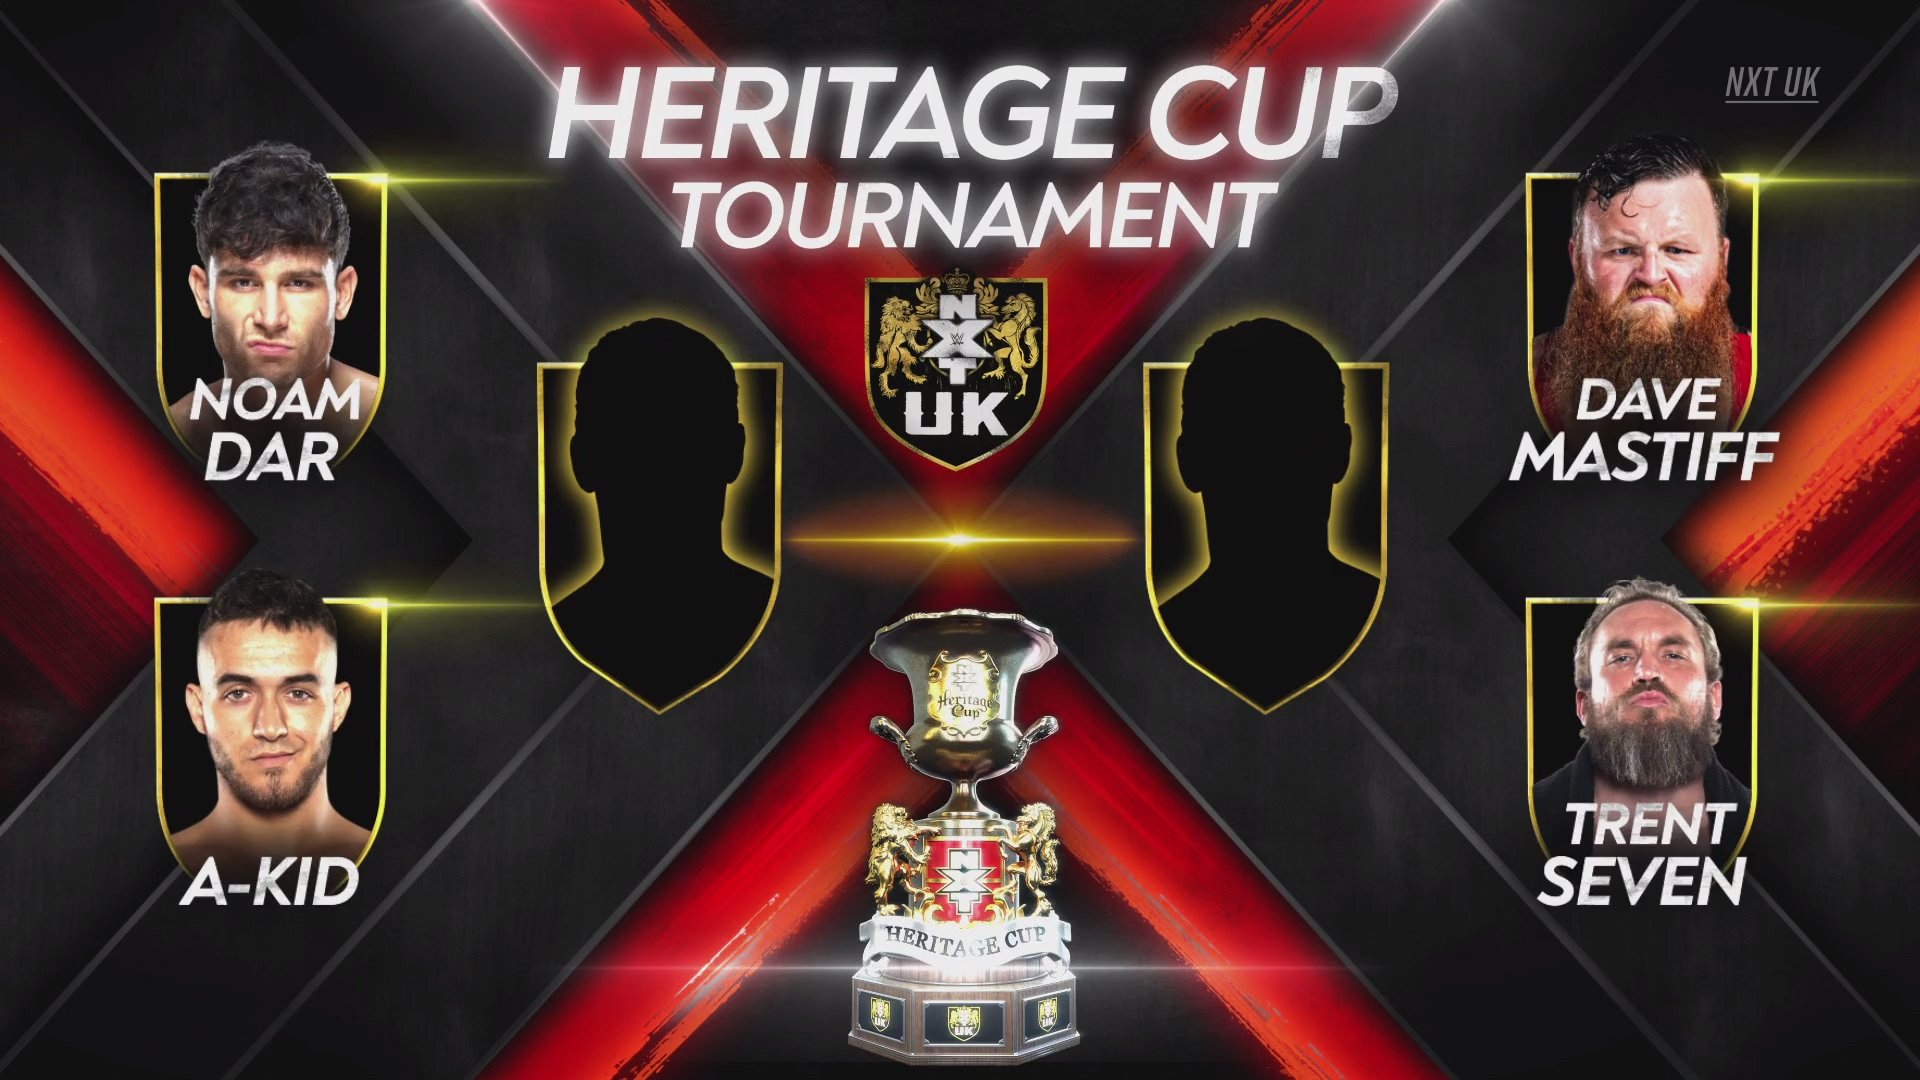 Updated Brackets for the WWE NXT UK Heritage Cup Tournament, Semi